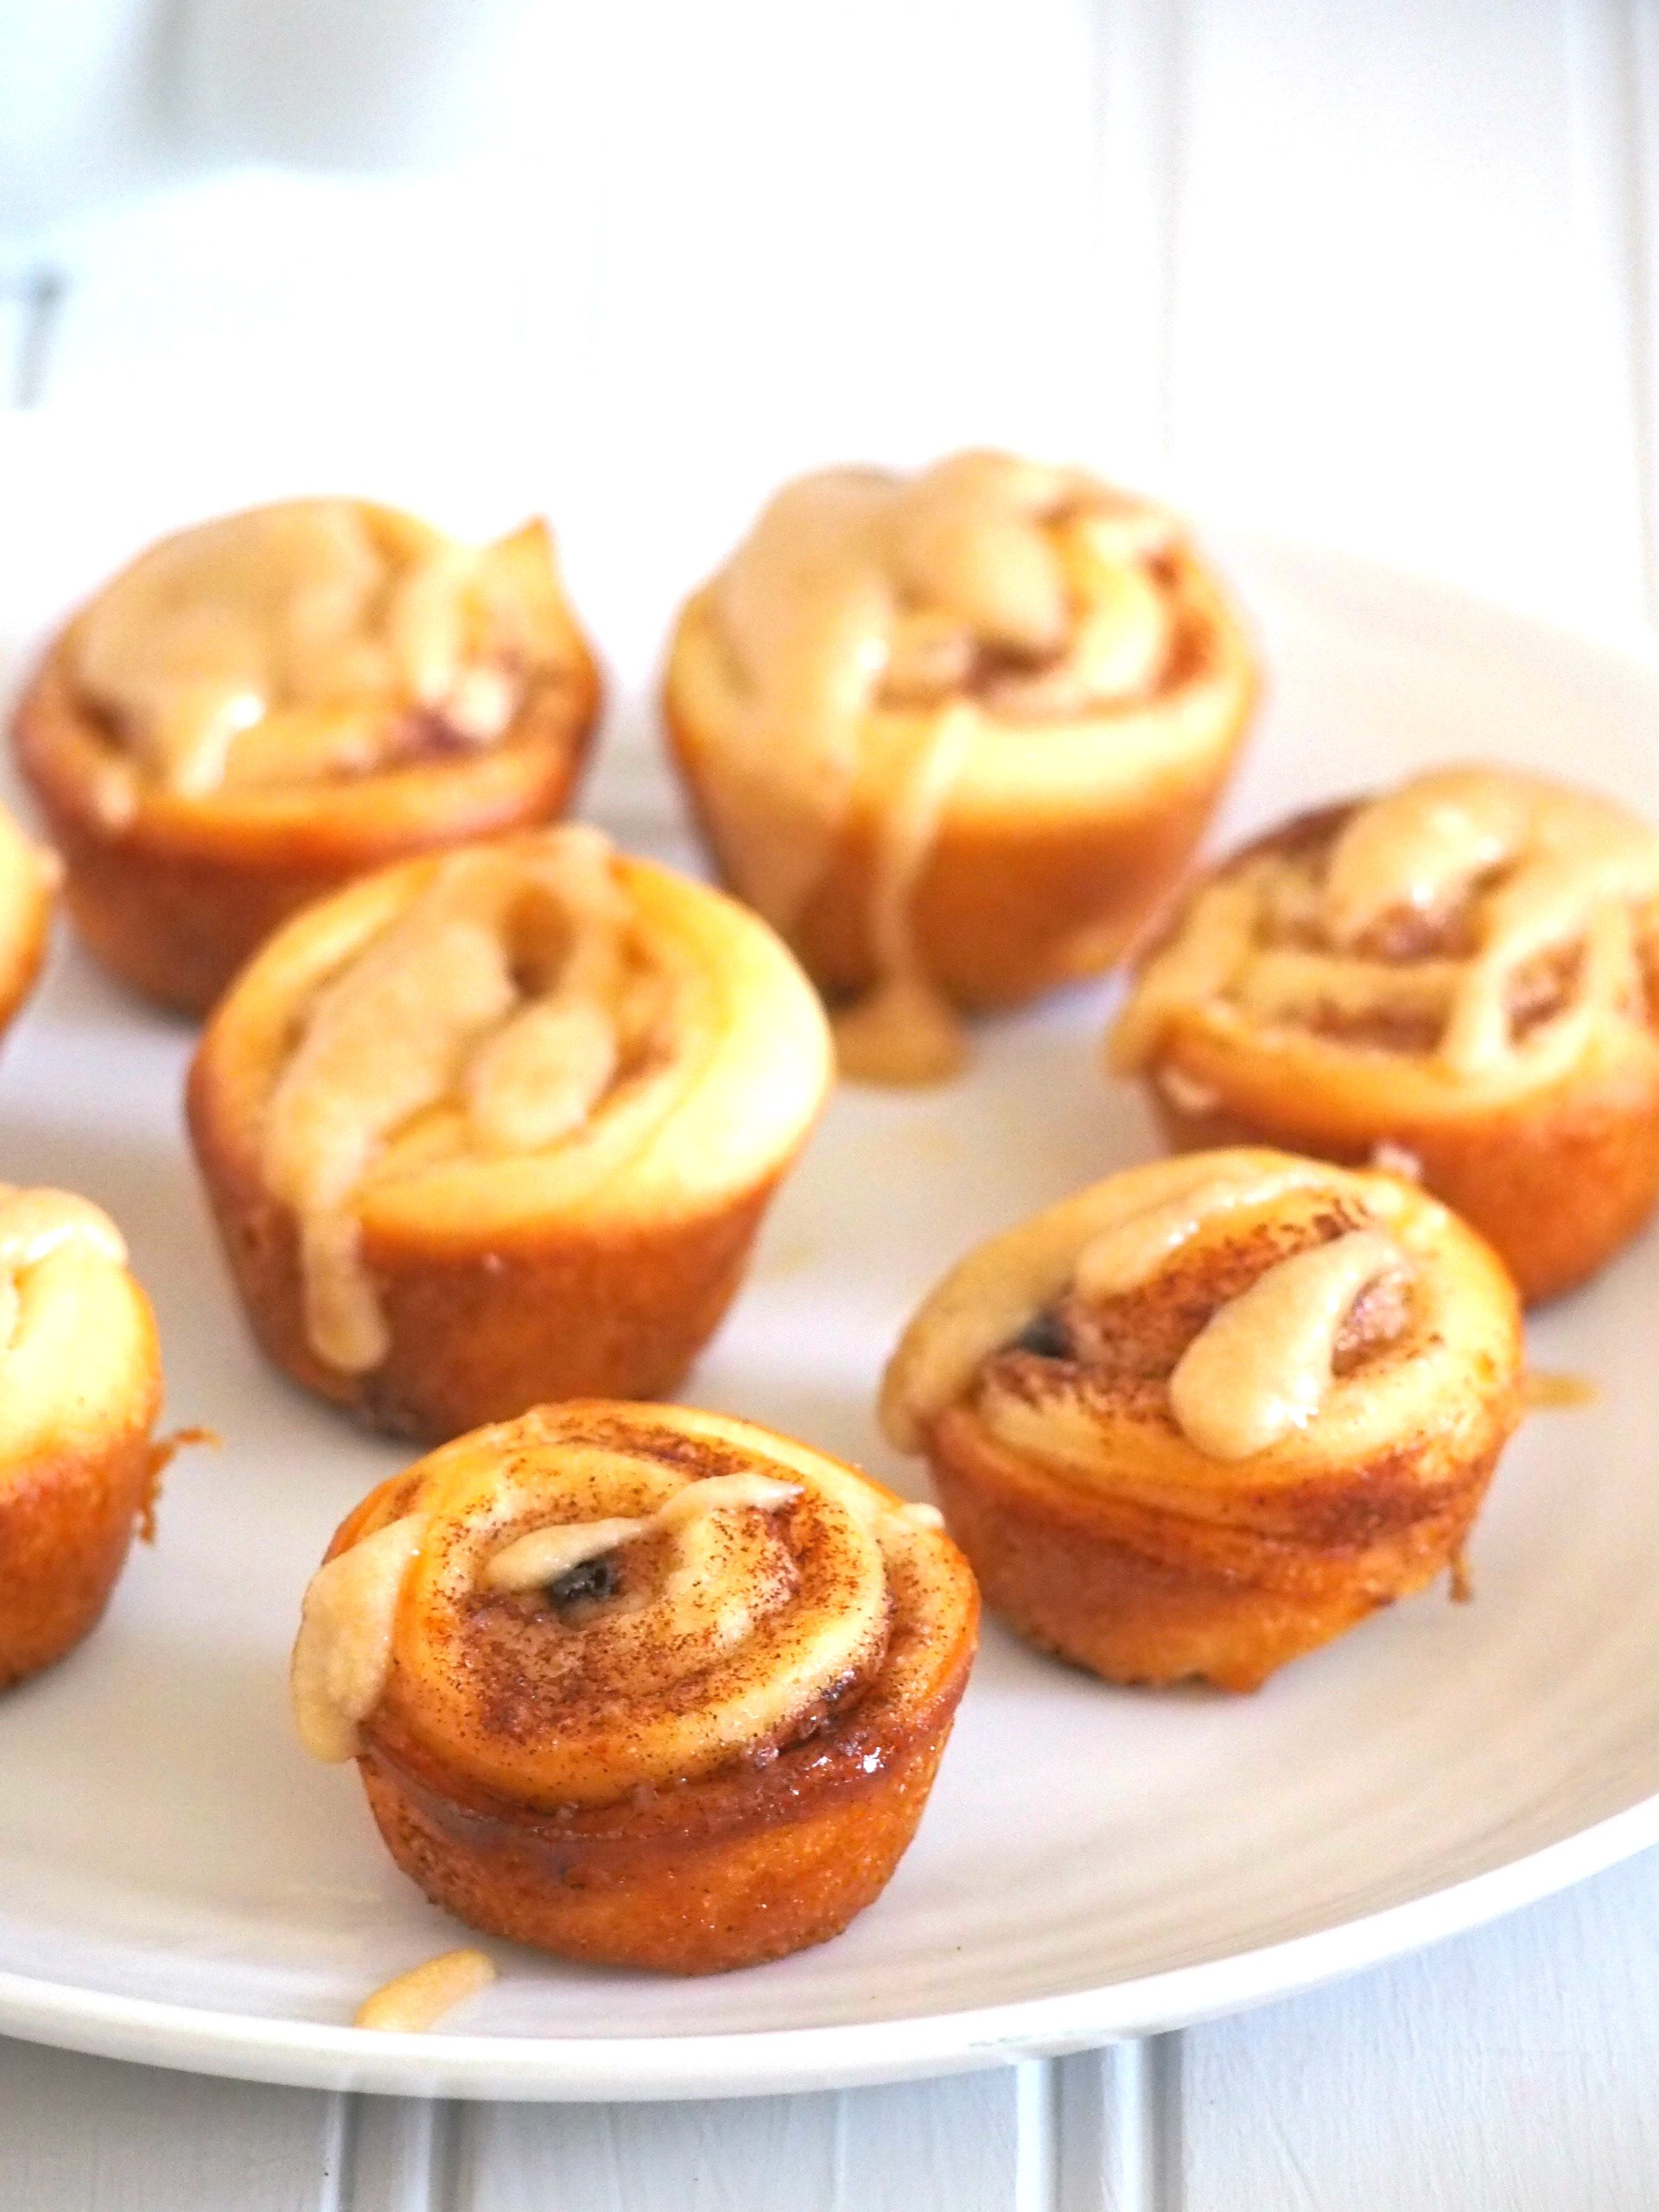 Try this mini cinnamon rolls recipe to yield cute mini buns that are glazed with a creamy coffee icing.